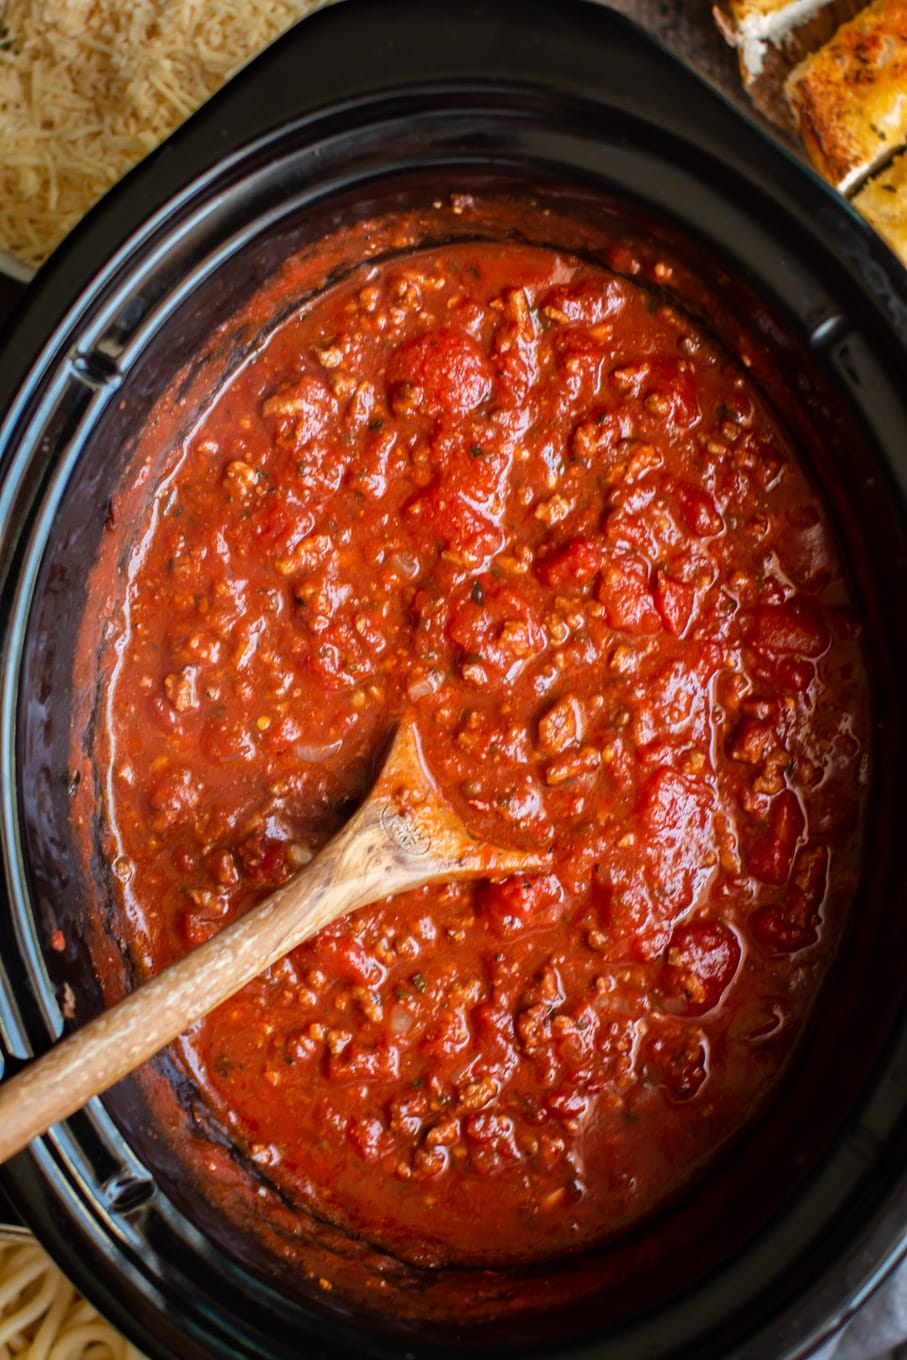 Close up of cooked spaghetti sauce in the slow cooker.